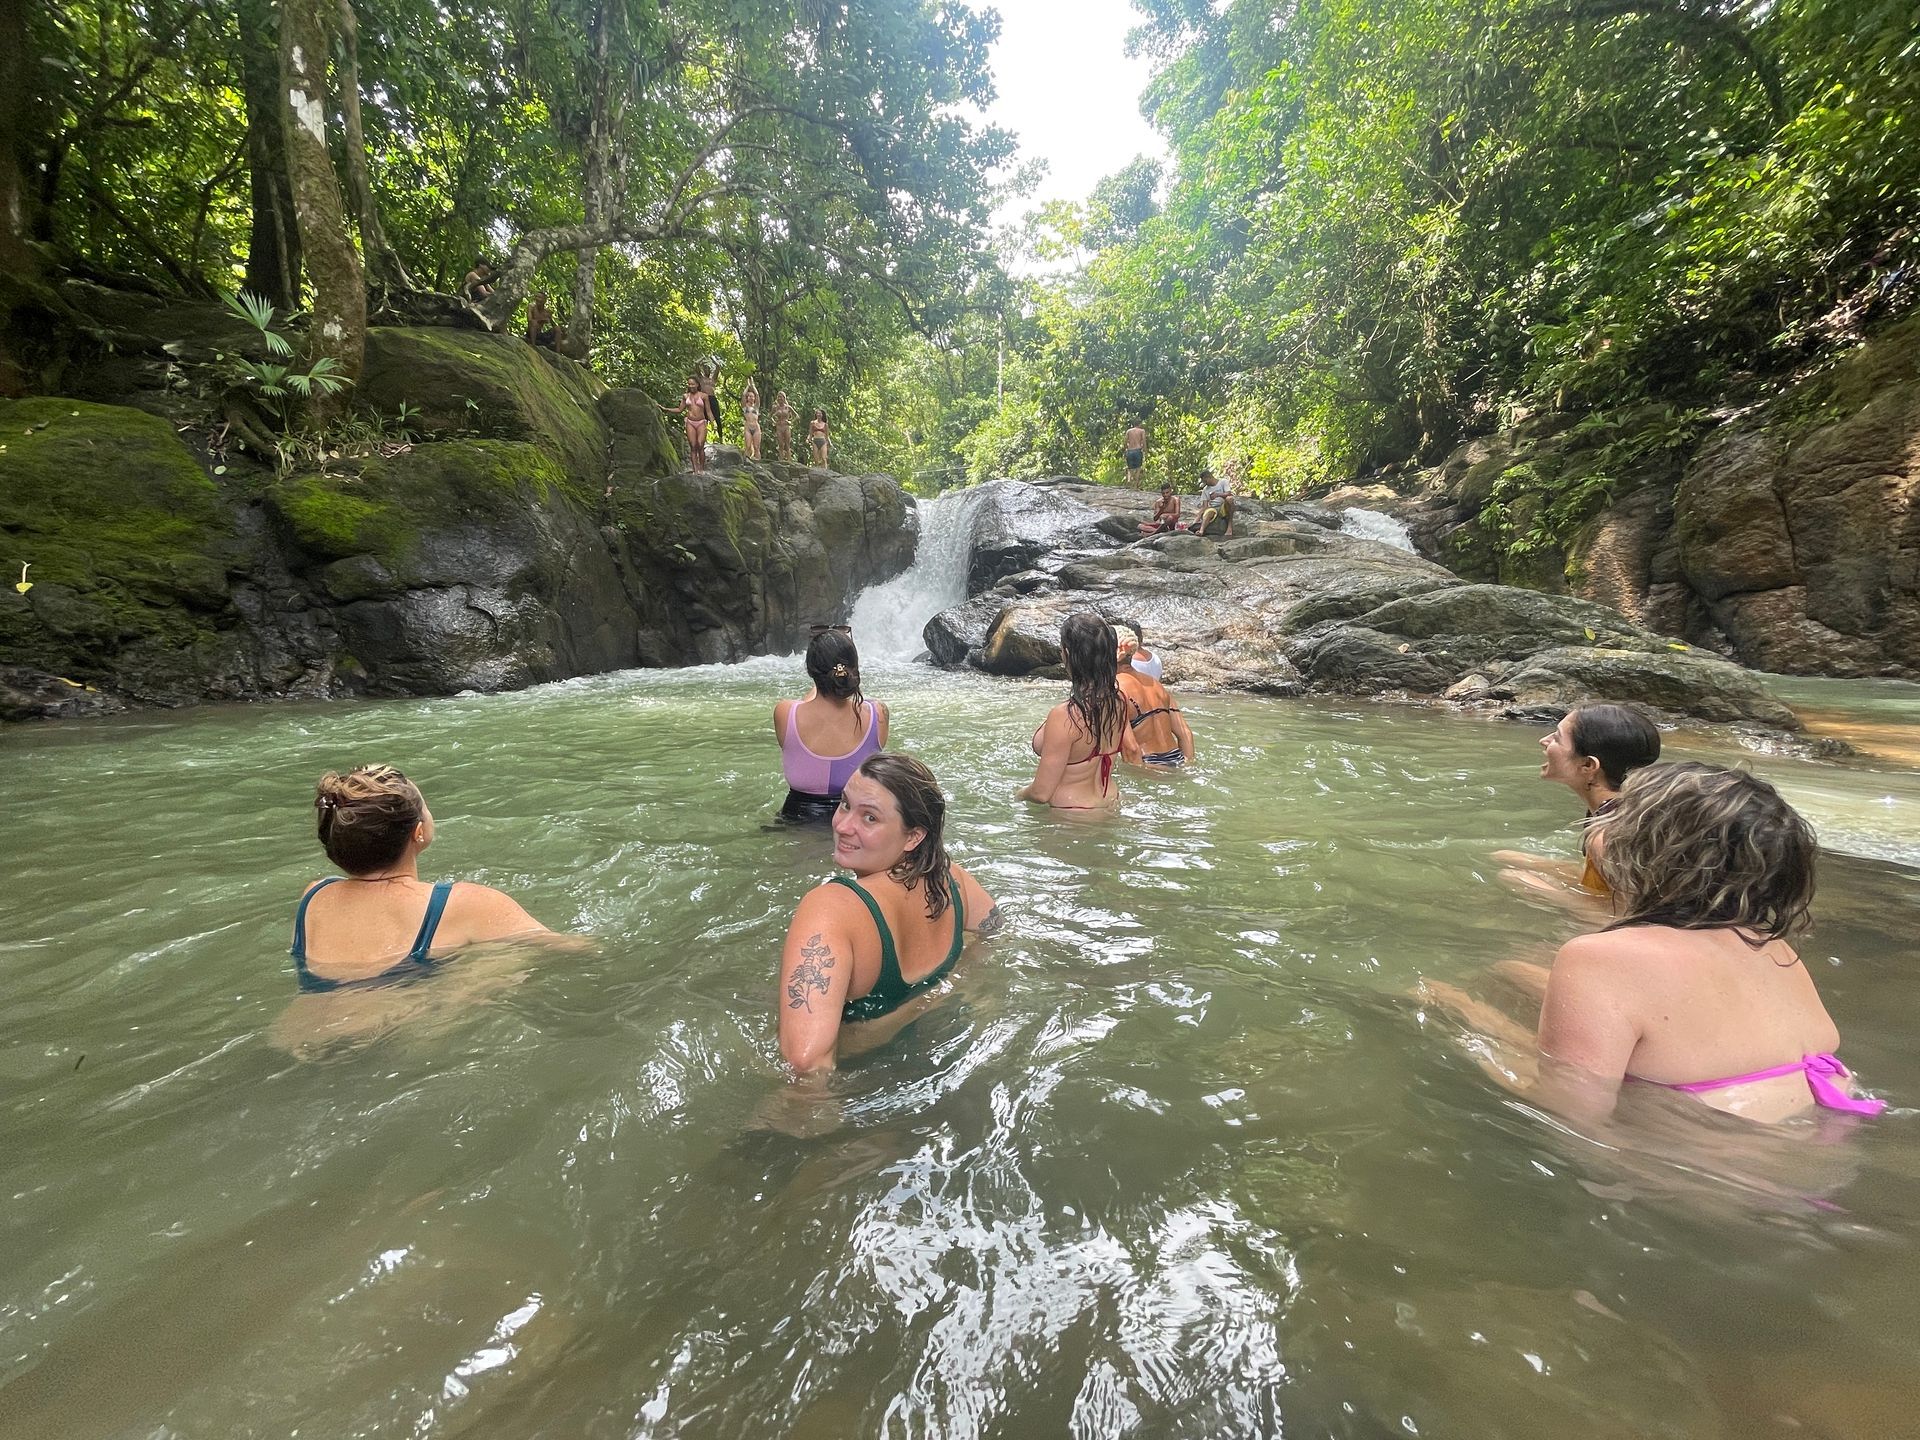 Youth Tour Packages Opportunities for young adults to travel in Costa Rica